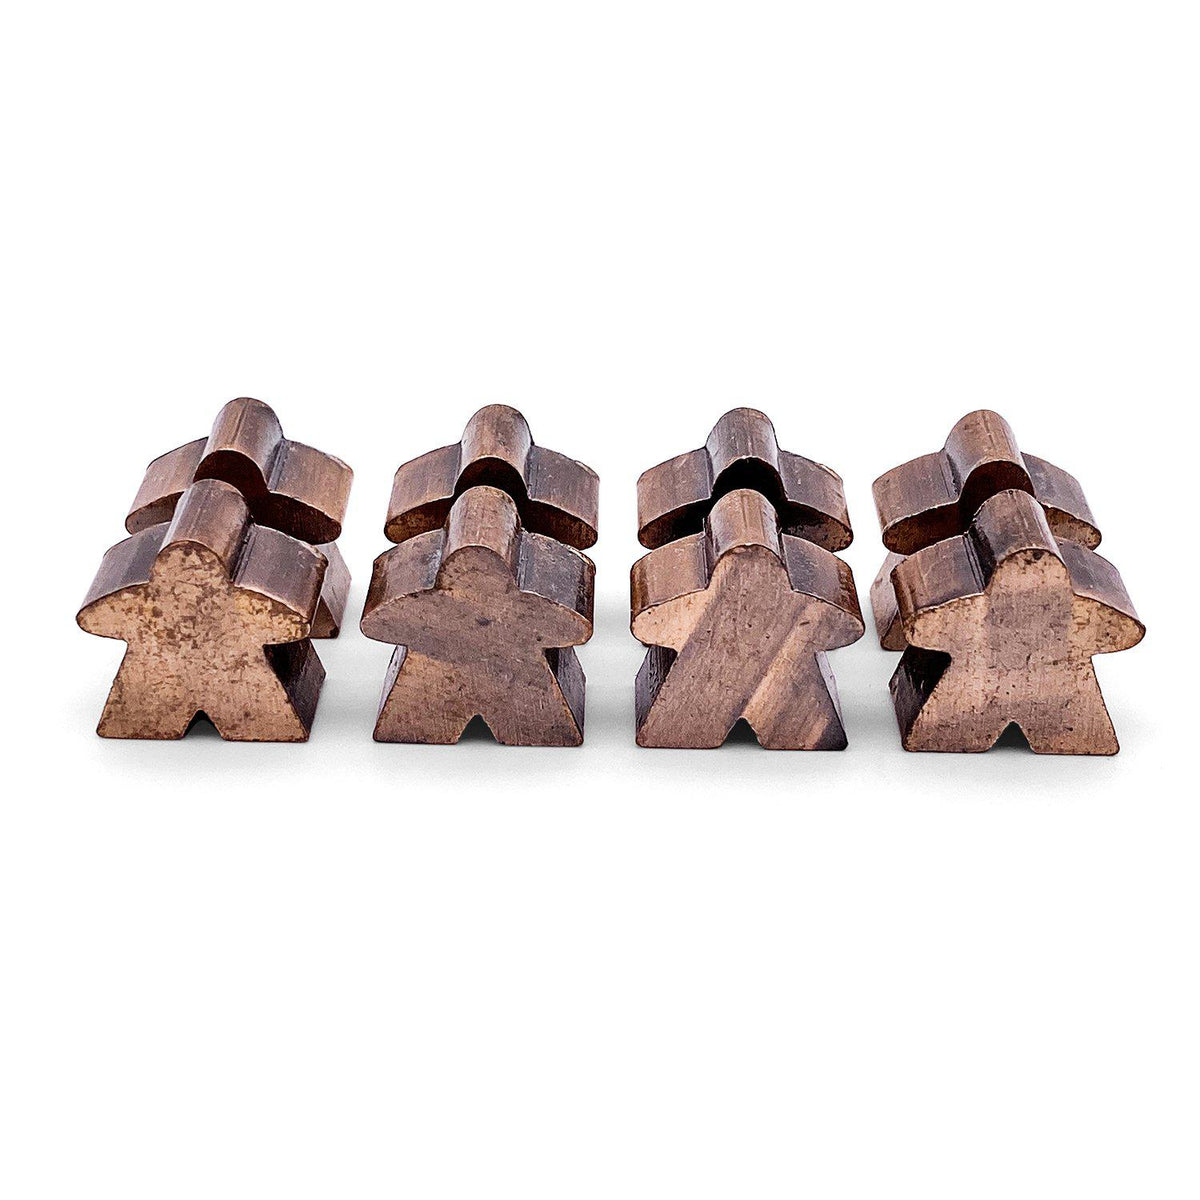 8 Pack of Antique Copper Metal Meeples by Norse Foundry